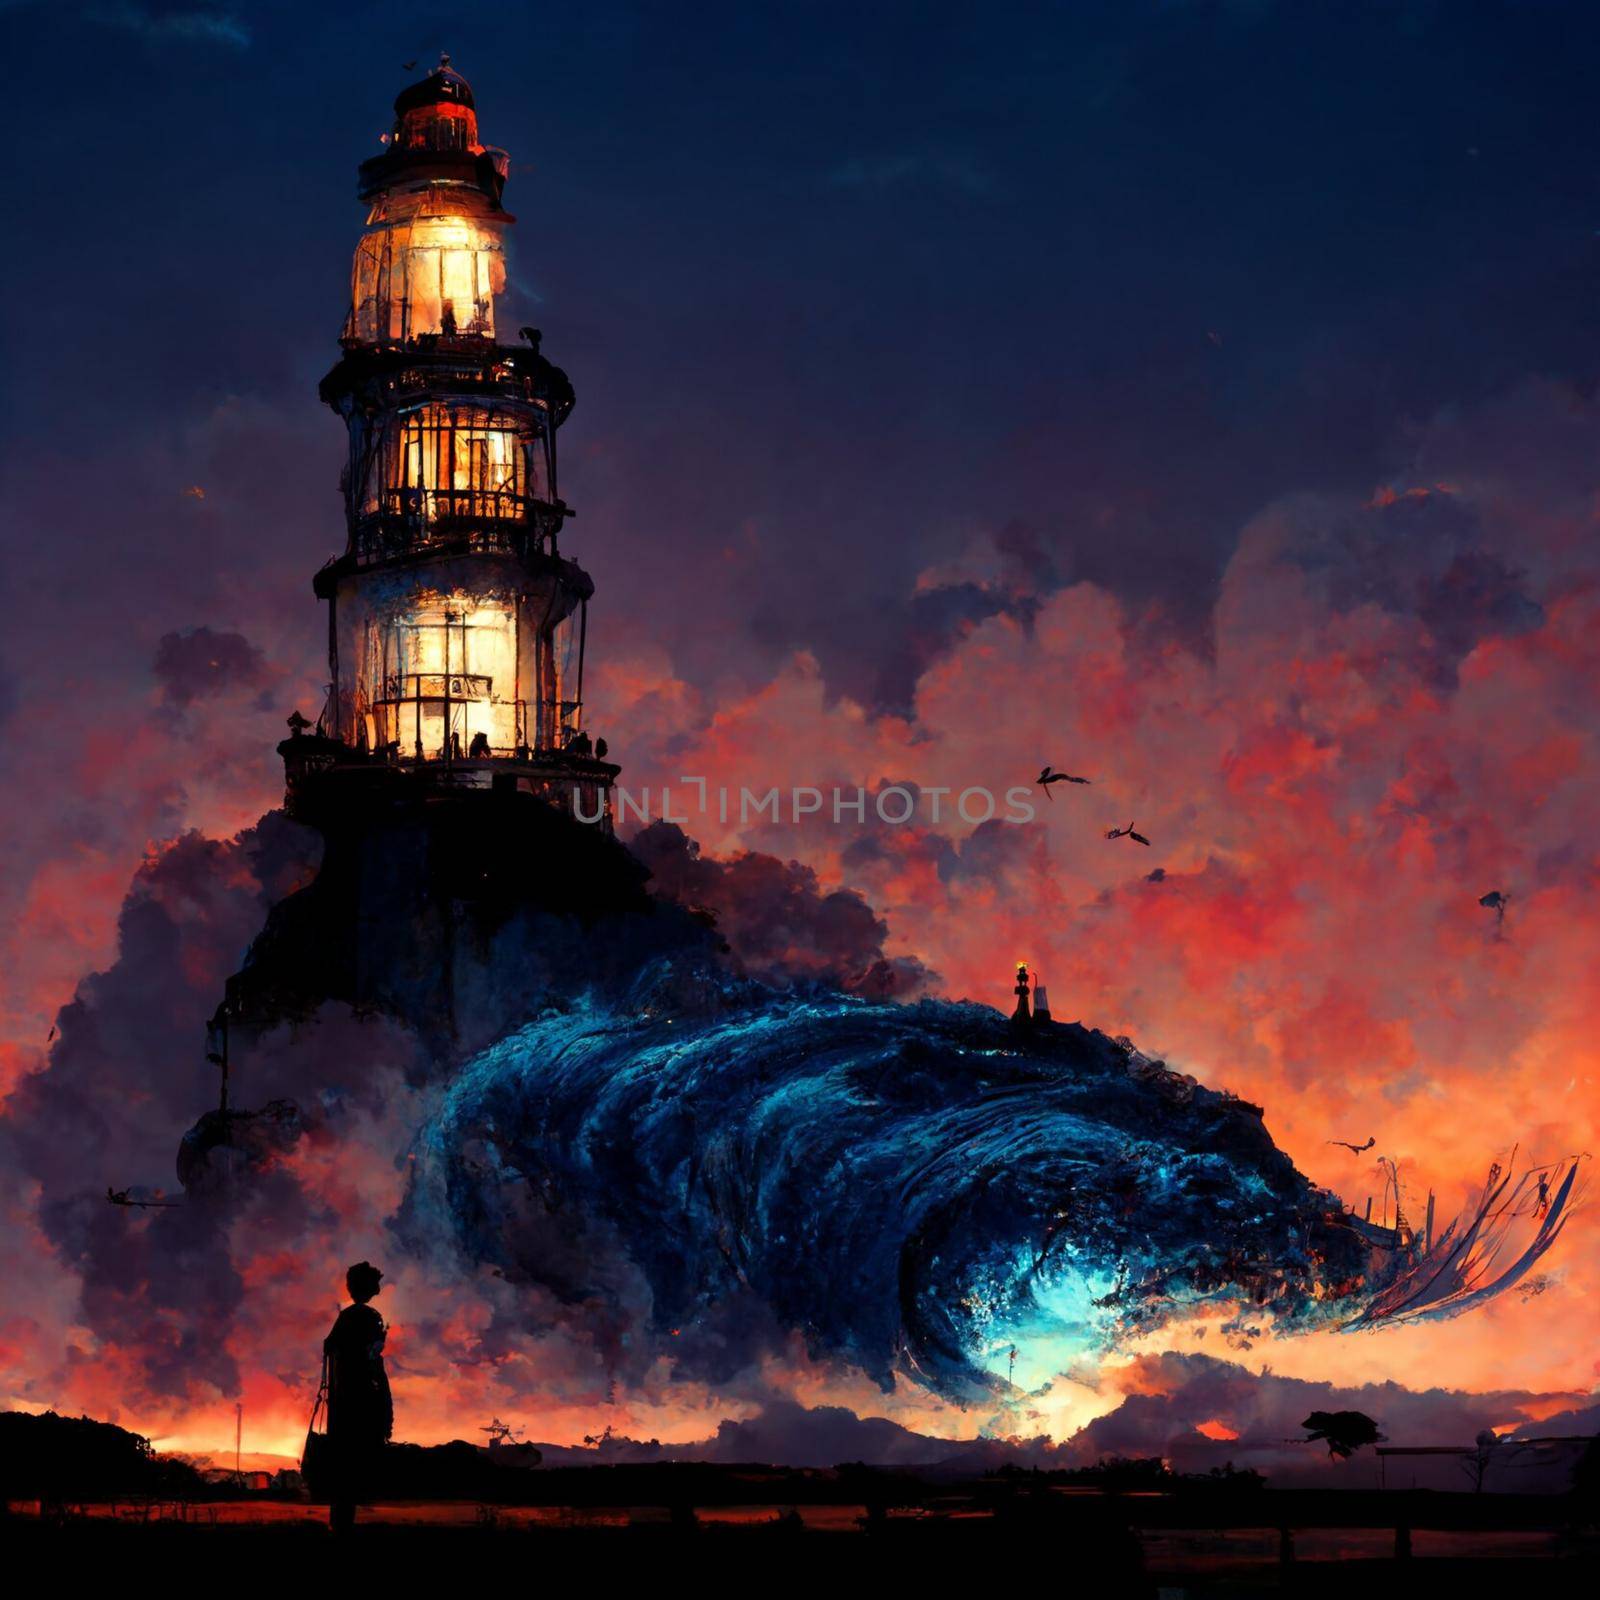 Abstract illustration of a lighthouse at sunset by NeuroSky